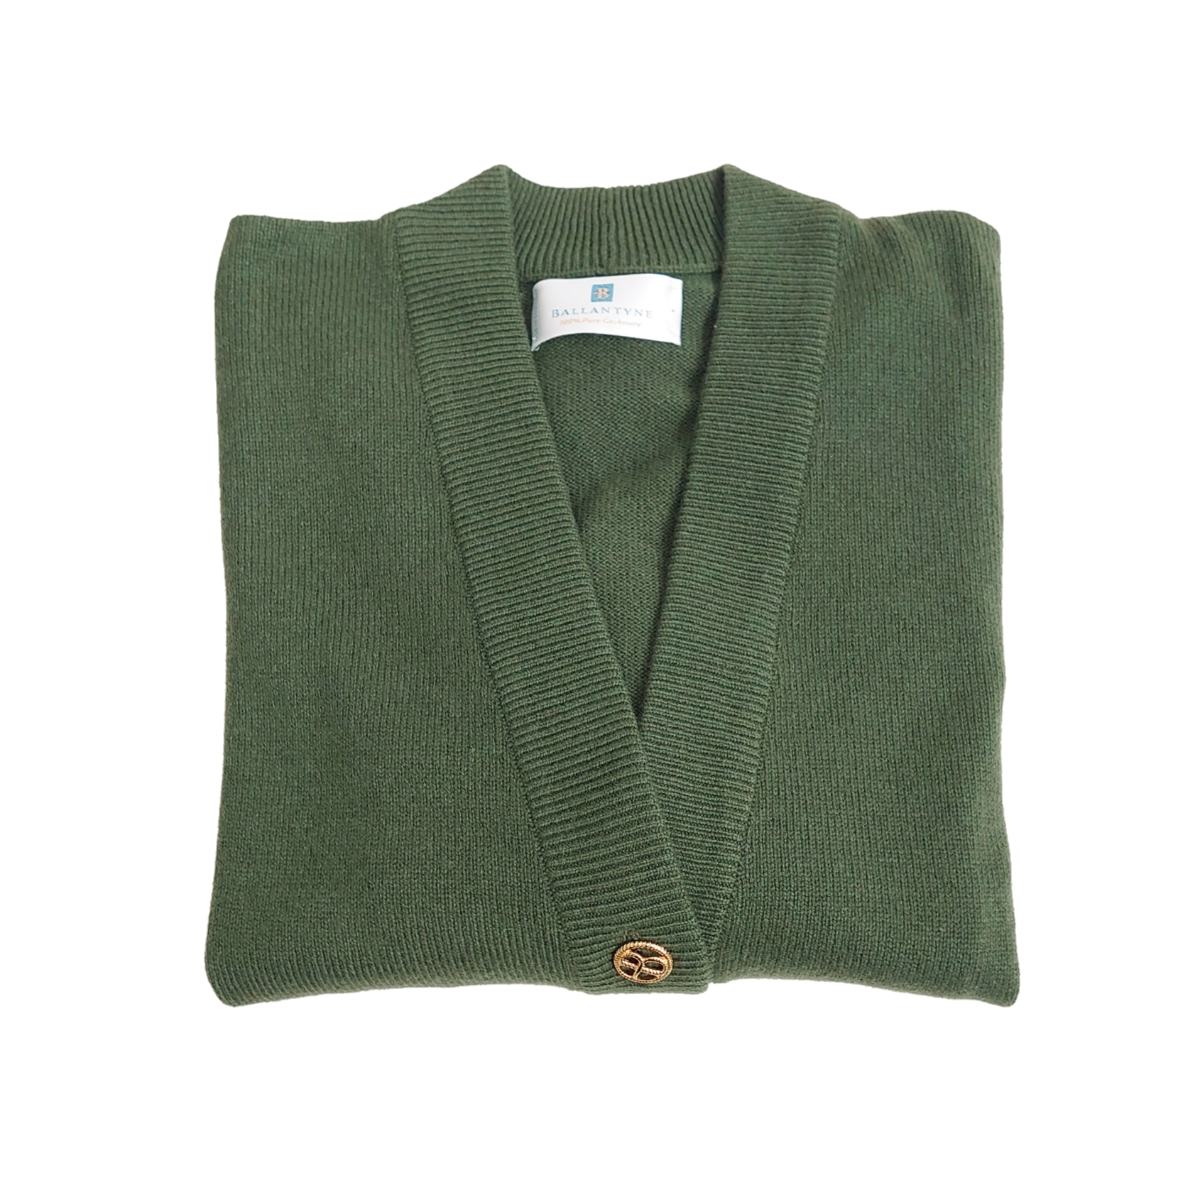 Ladies 100% Pure Cashmere Ballantyne Long, Loose Fit Classic Cardigan - Loden Green - M - L